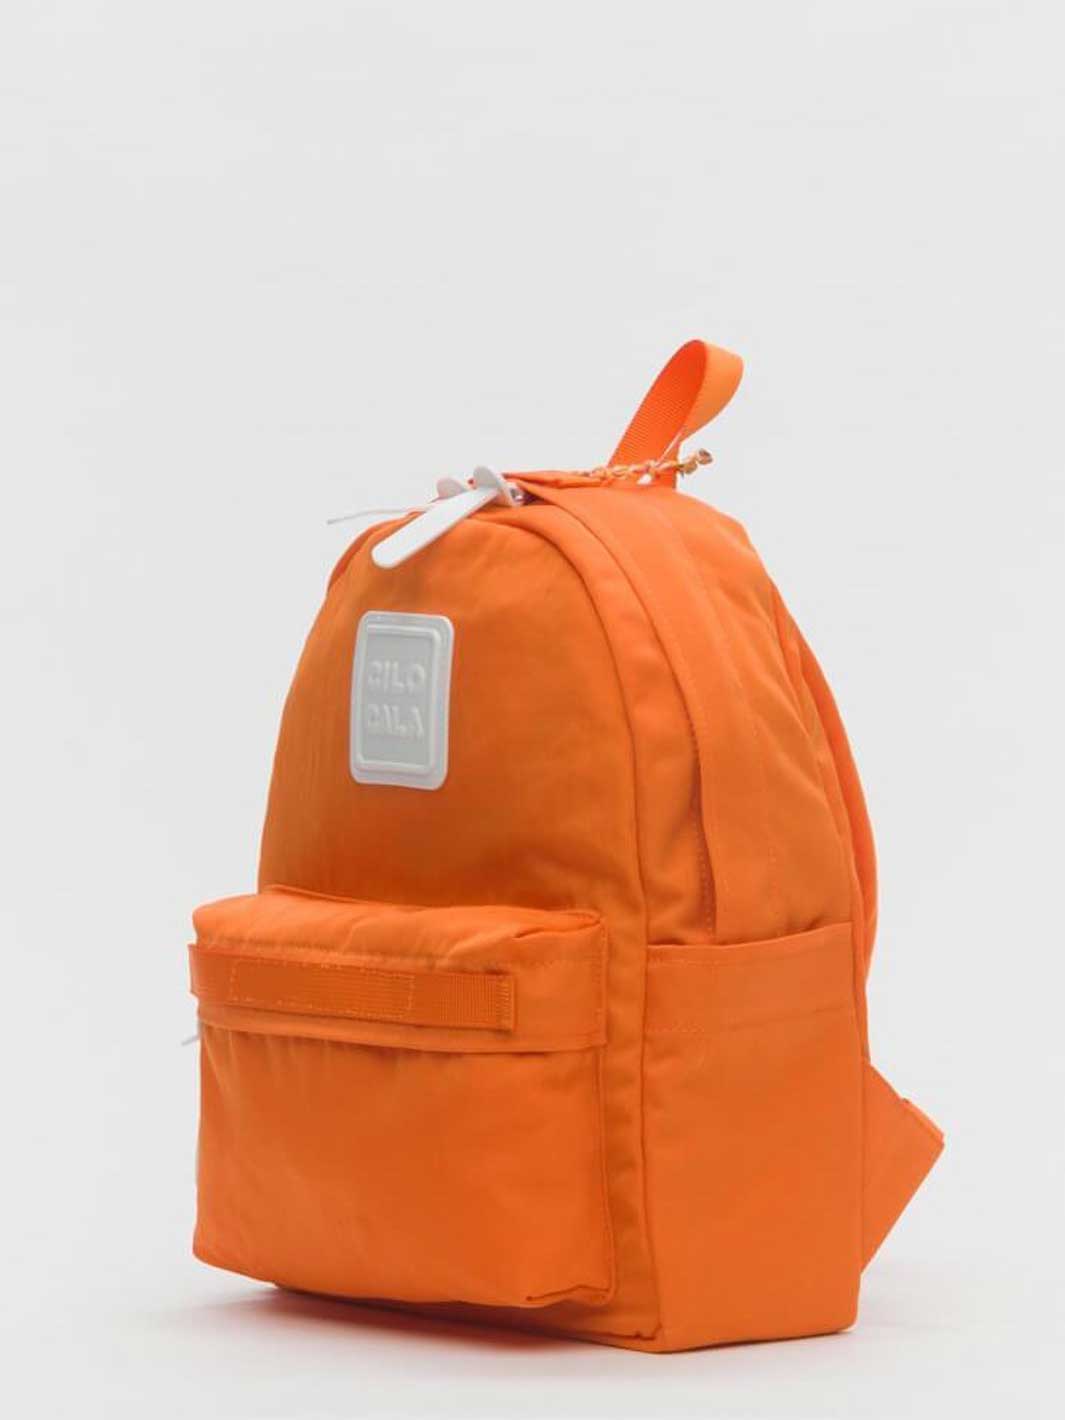 BACKPACK (SMALL)